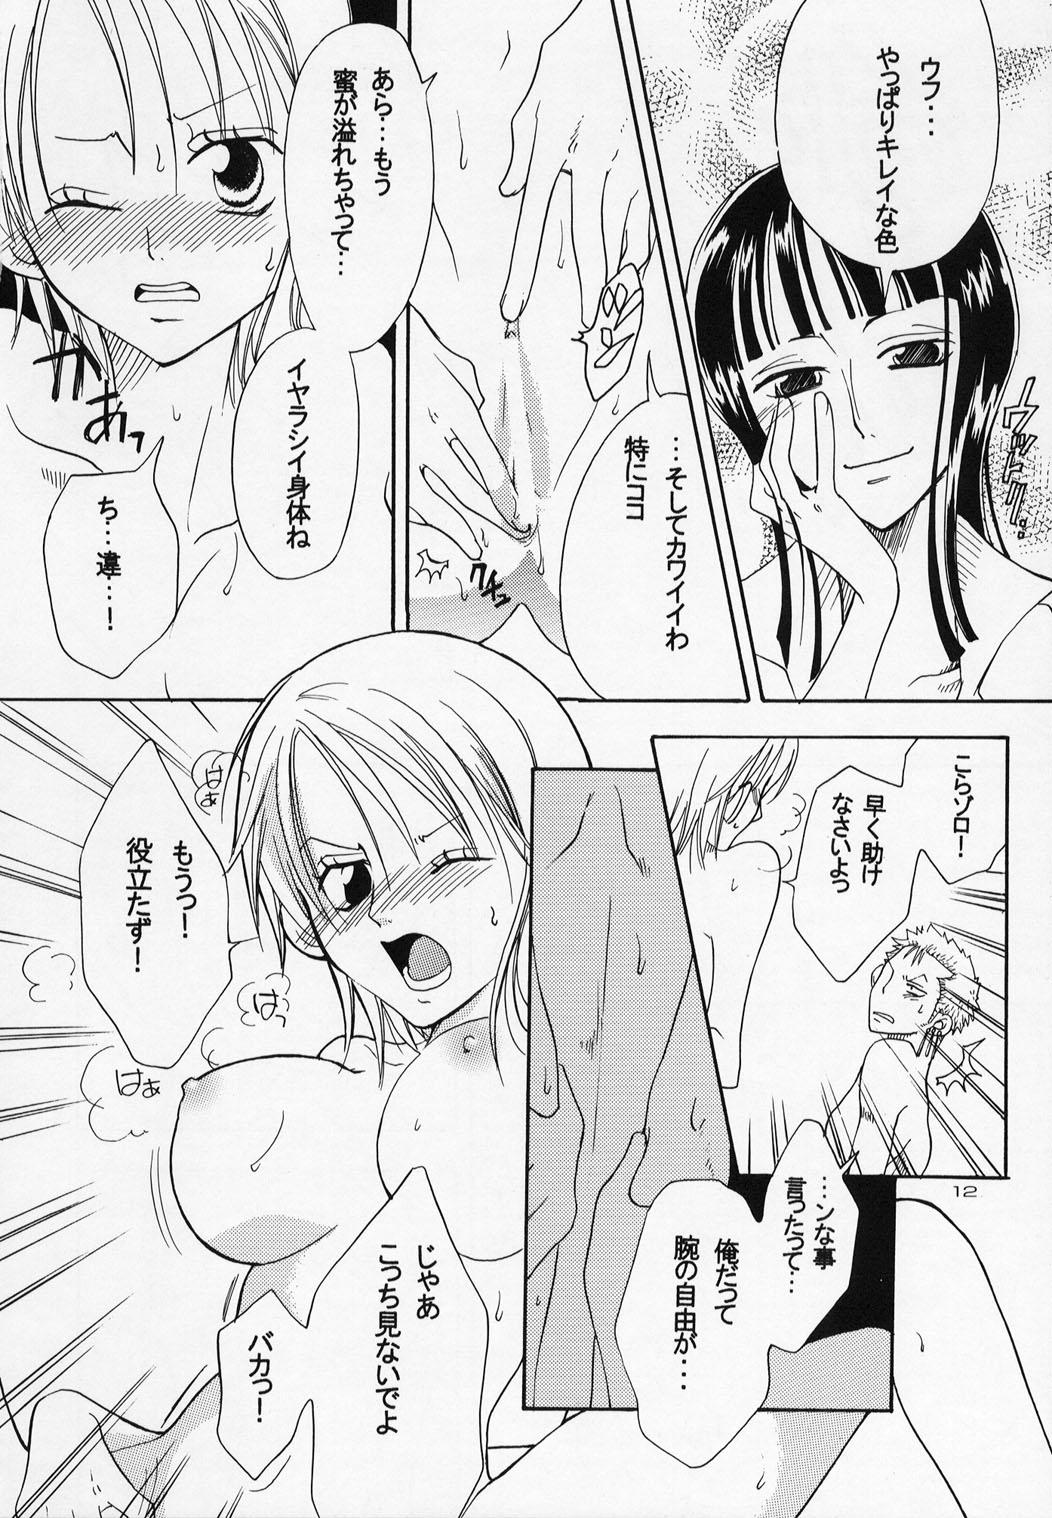 Amatures Gone Wild Shiawase Punch! 4 - One piece Piss - Page 12